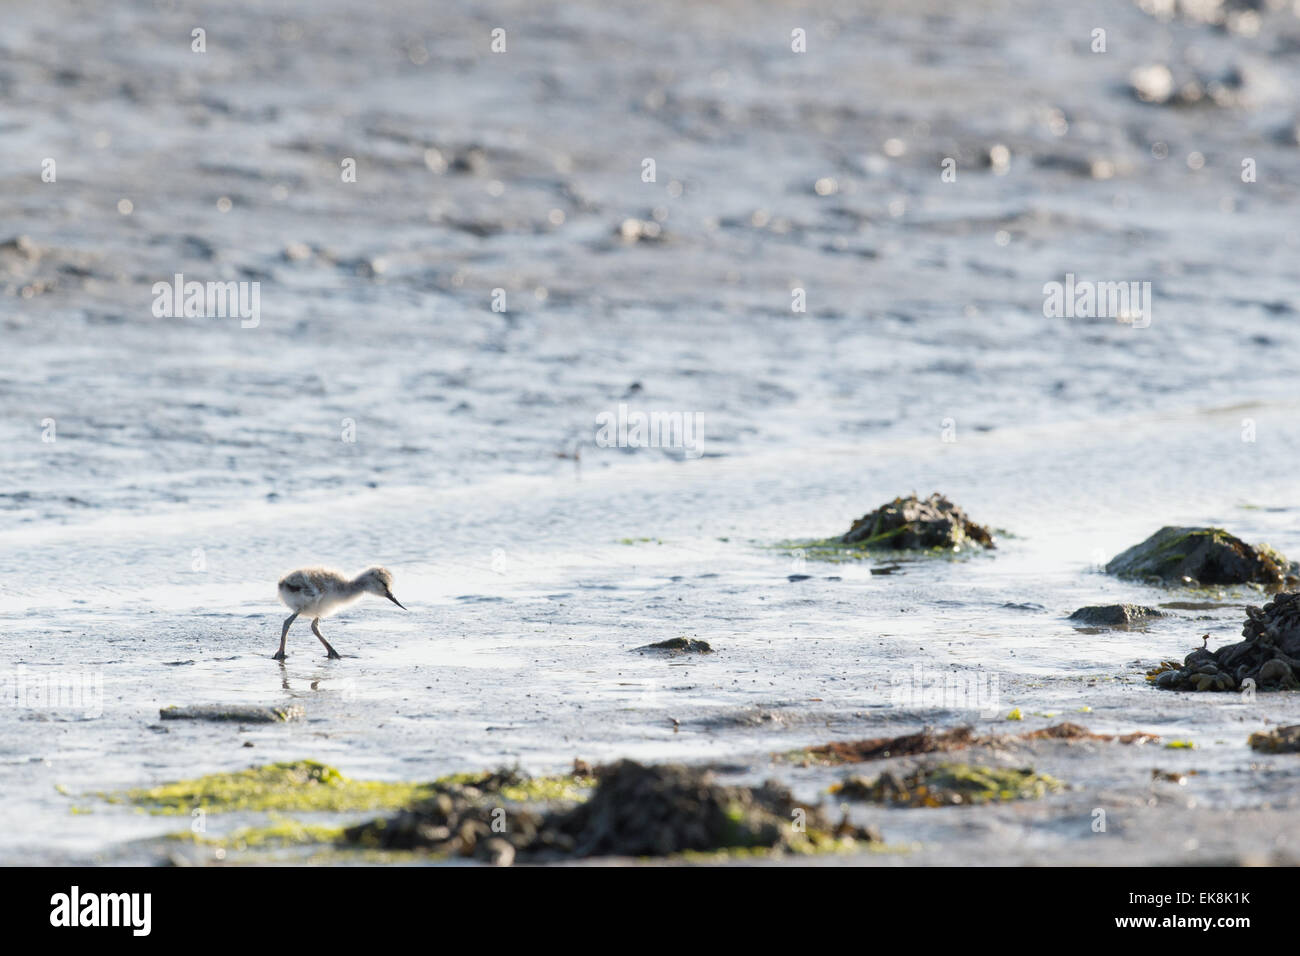 Avocet chick forage in water Stock Photo